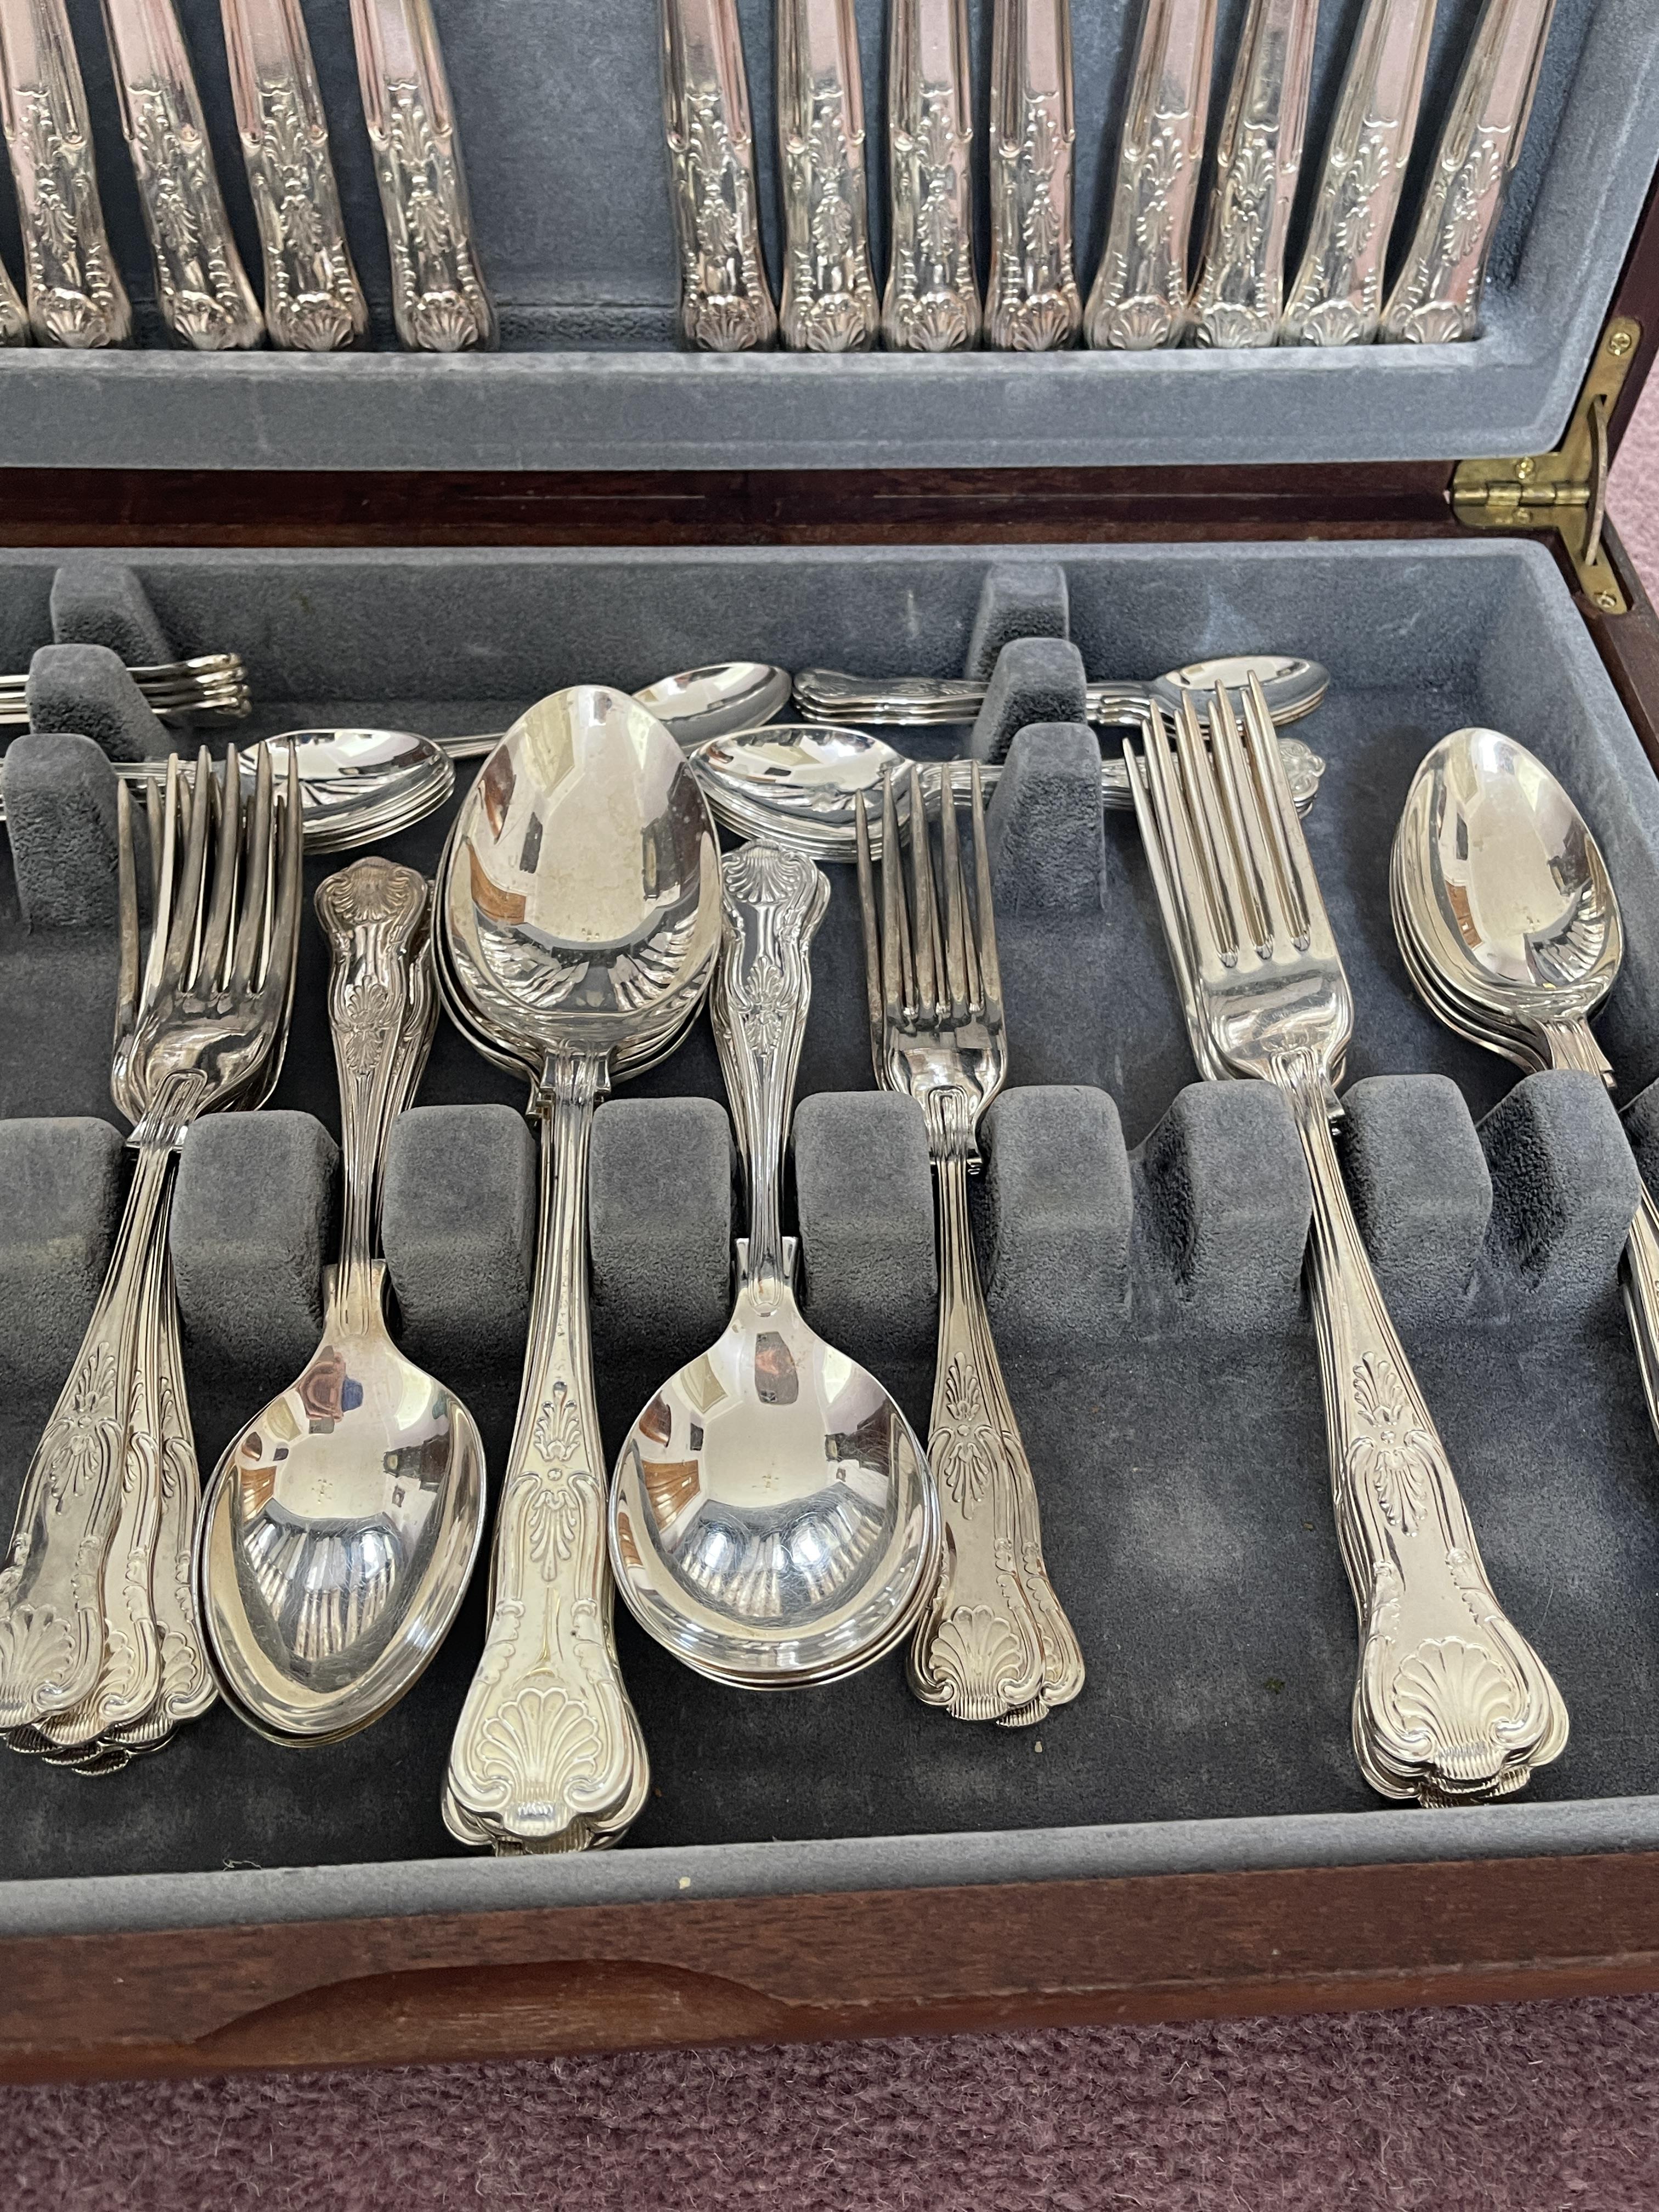 Cased Sheffield England Stainless Steel Cutlery Se - Image 7 of 10